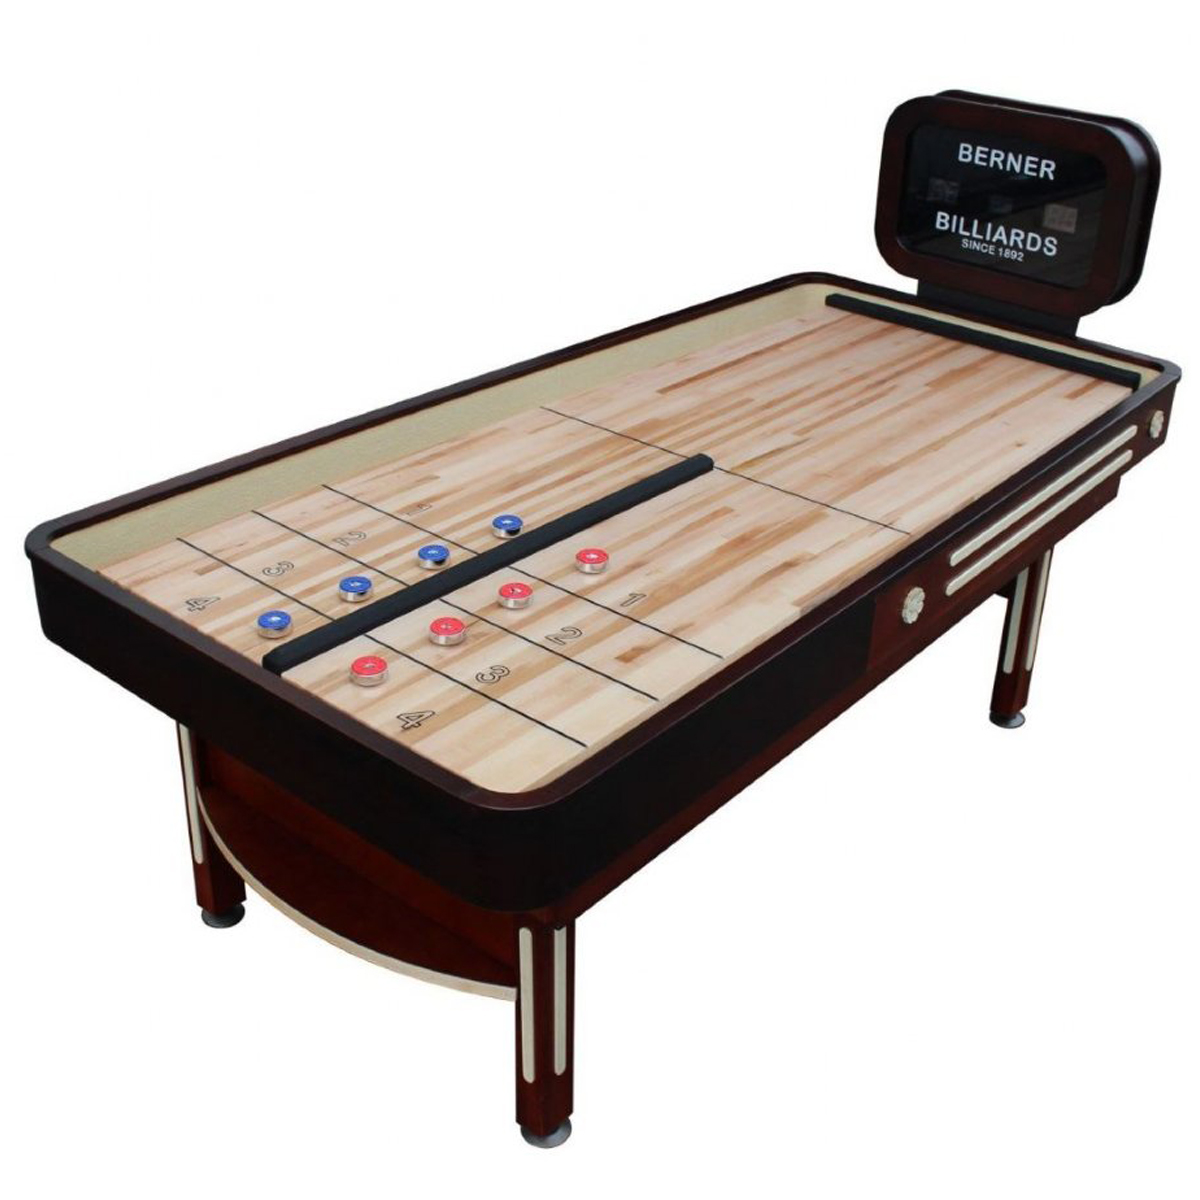 The-Rebound-Shuffleboard-Table-Limited-Edition-2-1.jpg